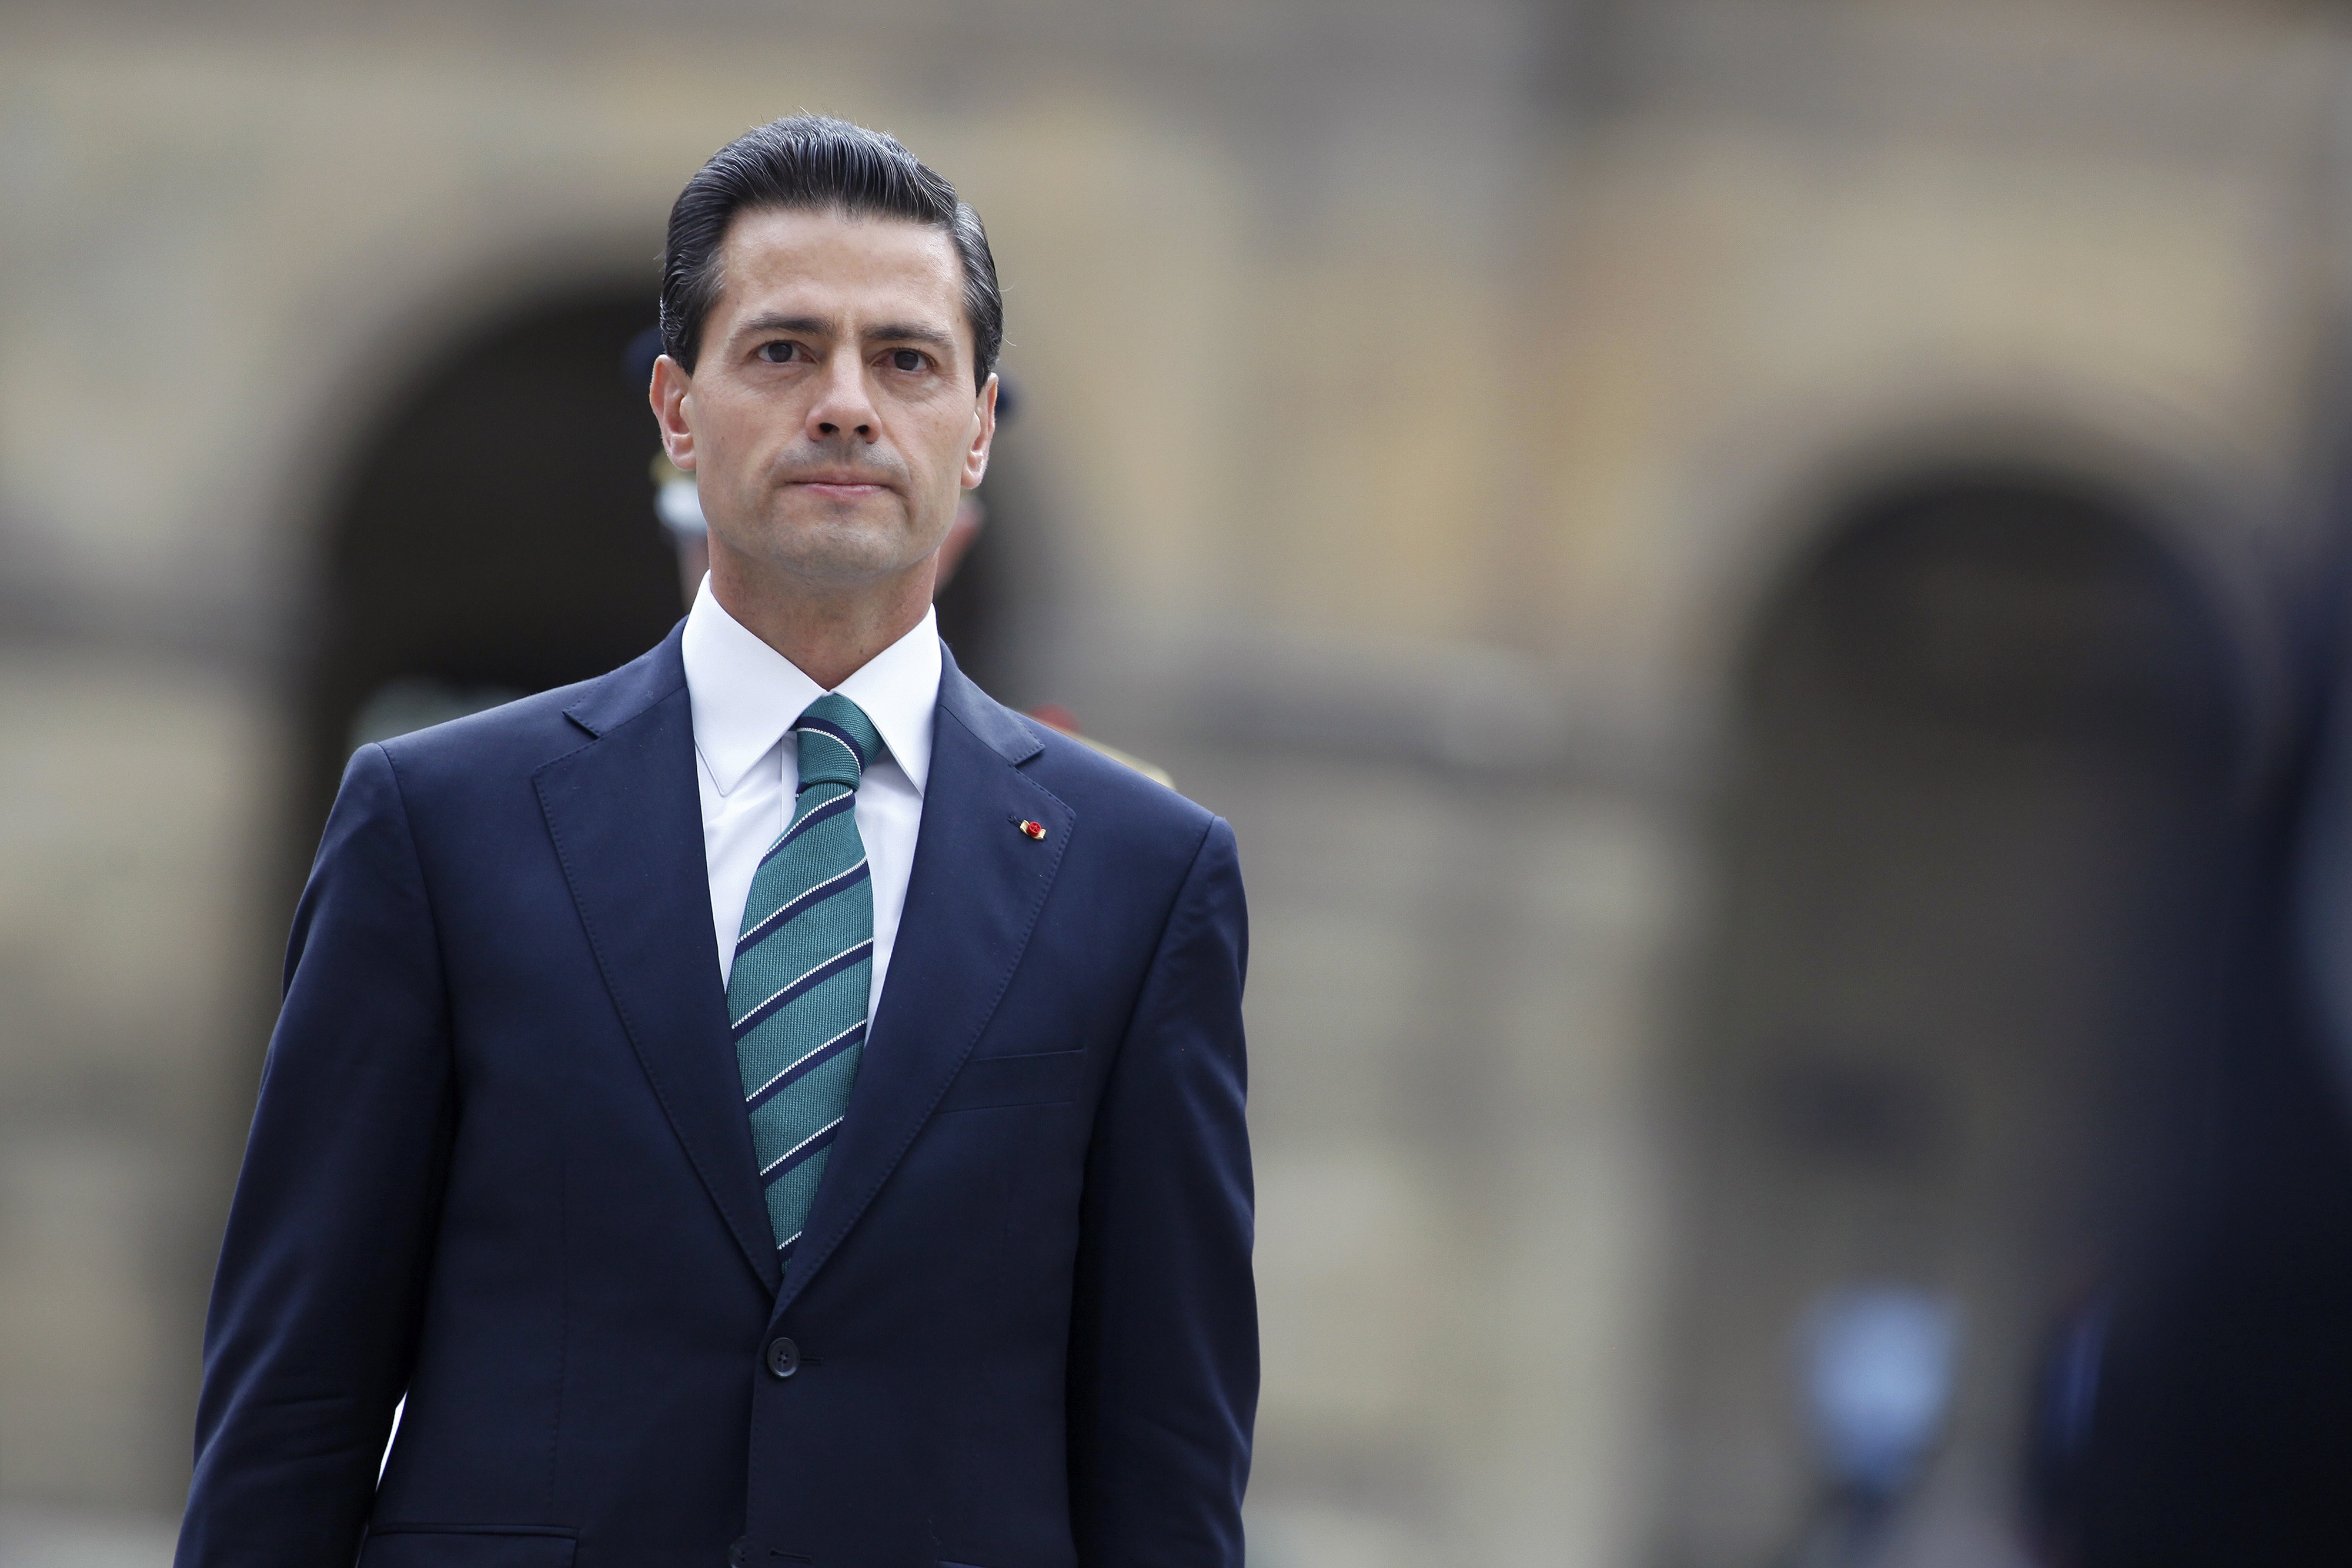 Protesters in Paris accused Peña Nieto's government of being mired in corruption and authoritarianism.